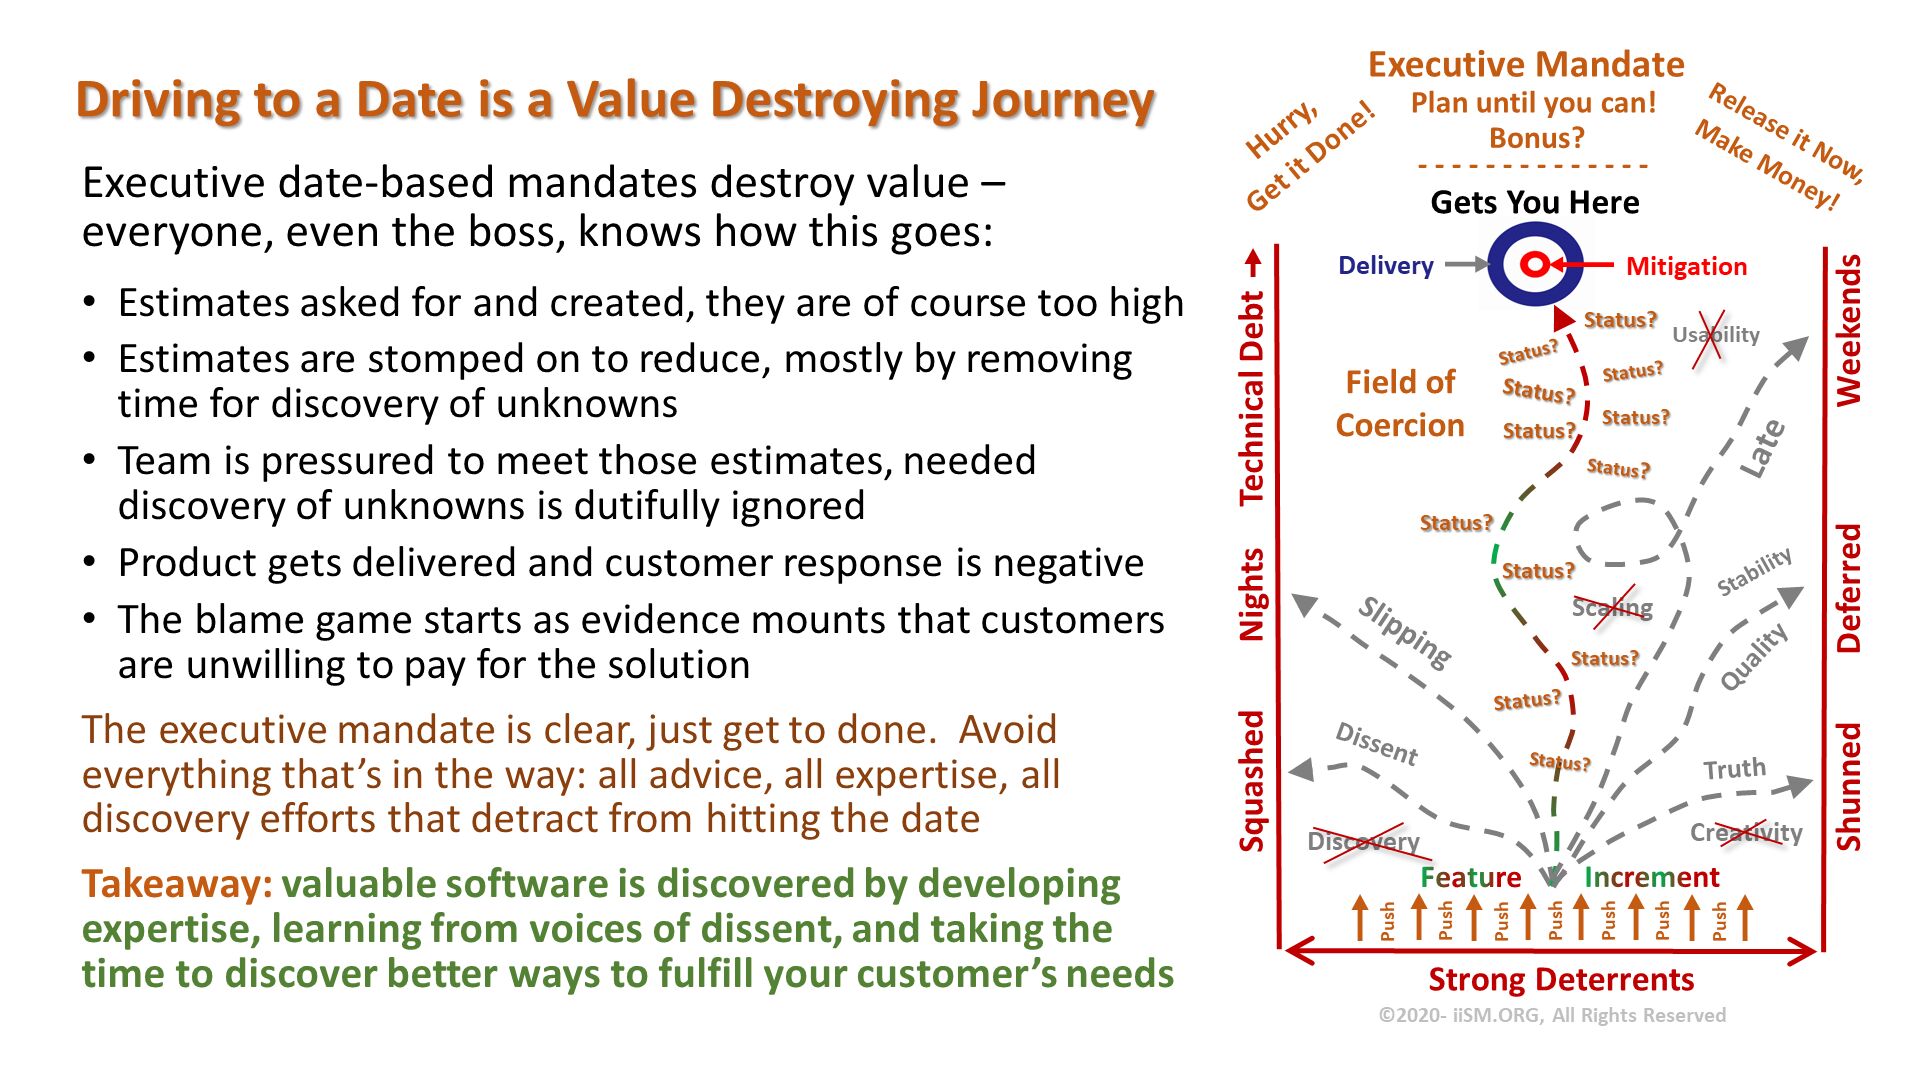 Driving to a Date is a Value Destroying Journey. Executive date-based mandates destroy value – everyone, even the boss, knows how this goes:  
Estimates asked for and created, they are of course too high
Estimates are stomped on to reduce, mostly by removing time for discovery of unknowns
Team is pressured to meet those estimates, needed discovery of unknowns is dutifully ignored
Product gets delivered and customer response is negative
The blame game starts as evidence mounts that customers are unwilling to pay for the solution
The executive mandate is clear, just get to done.  Avoid everything that’s in the way: all advice, all expertise, all discovery efforts that detract from hitting the date
Takeaway: valuable software is discovered by developing expertise, learning from voices of dissent, and taking the time to discover better ways to fulfill your customer’s needs. 